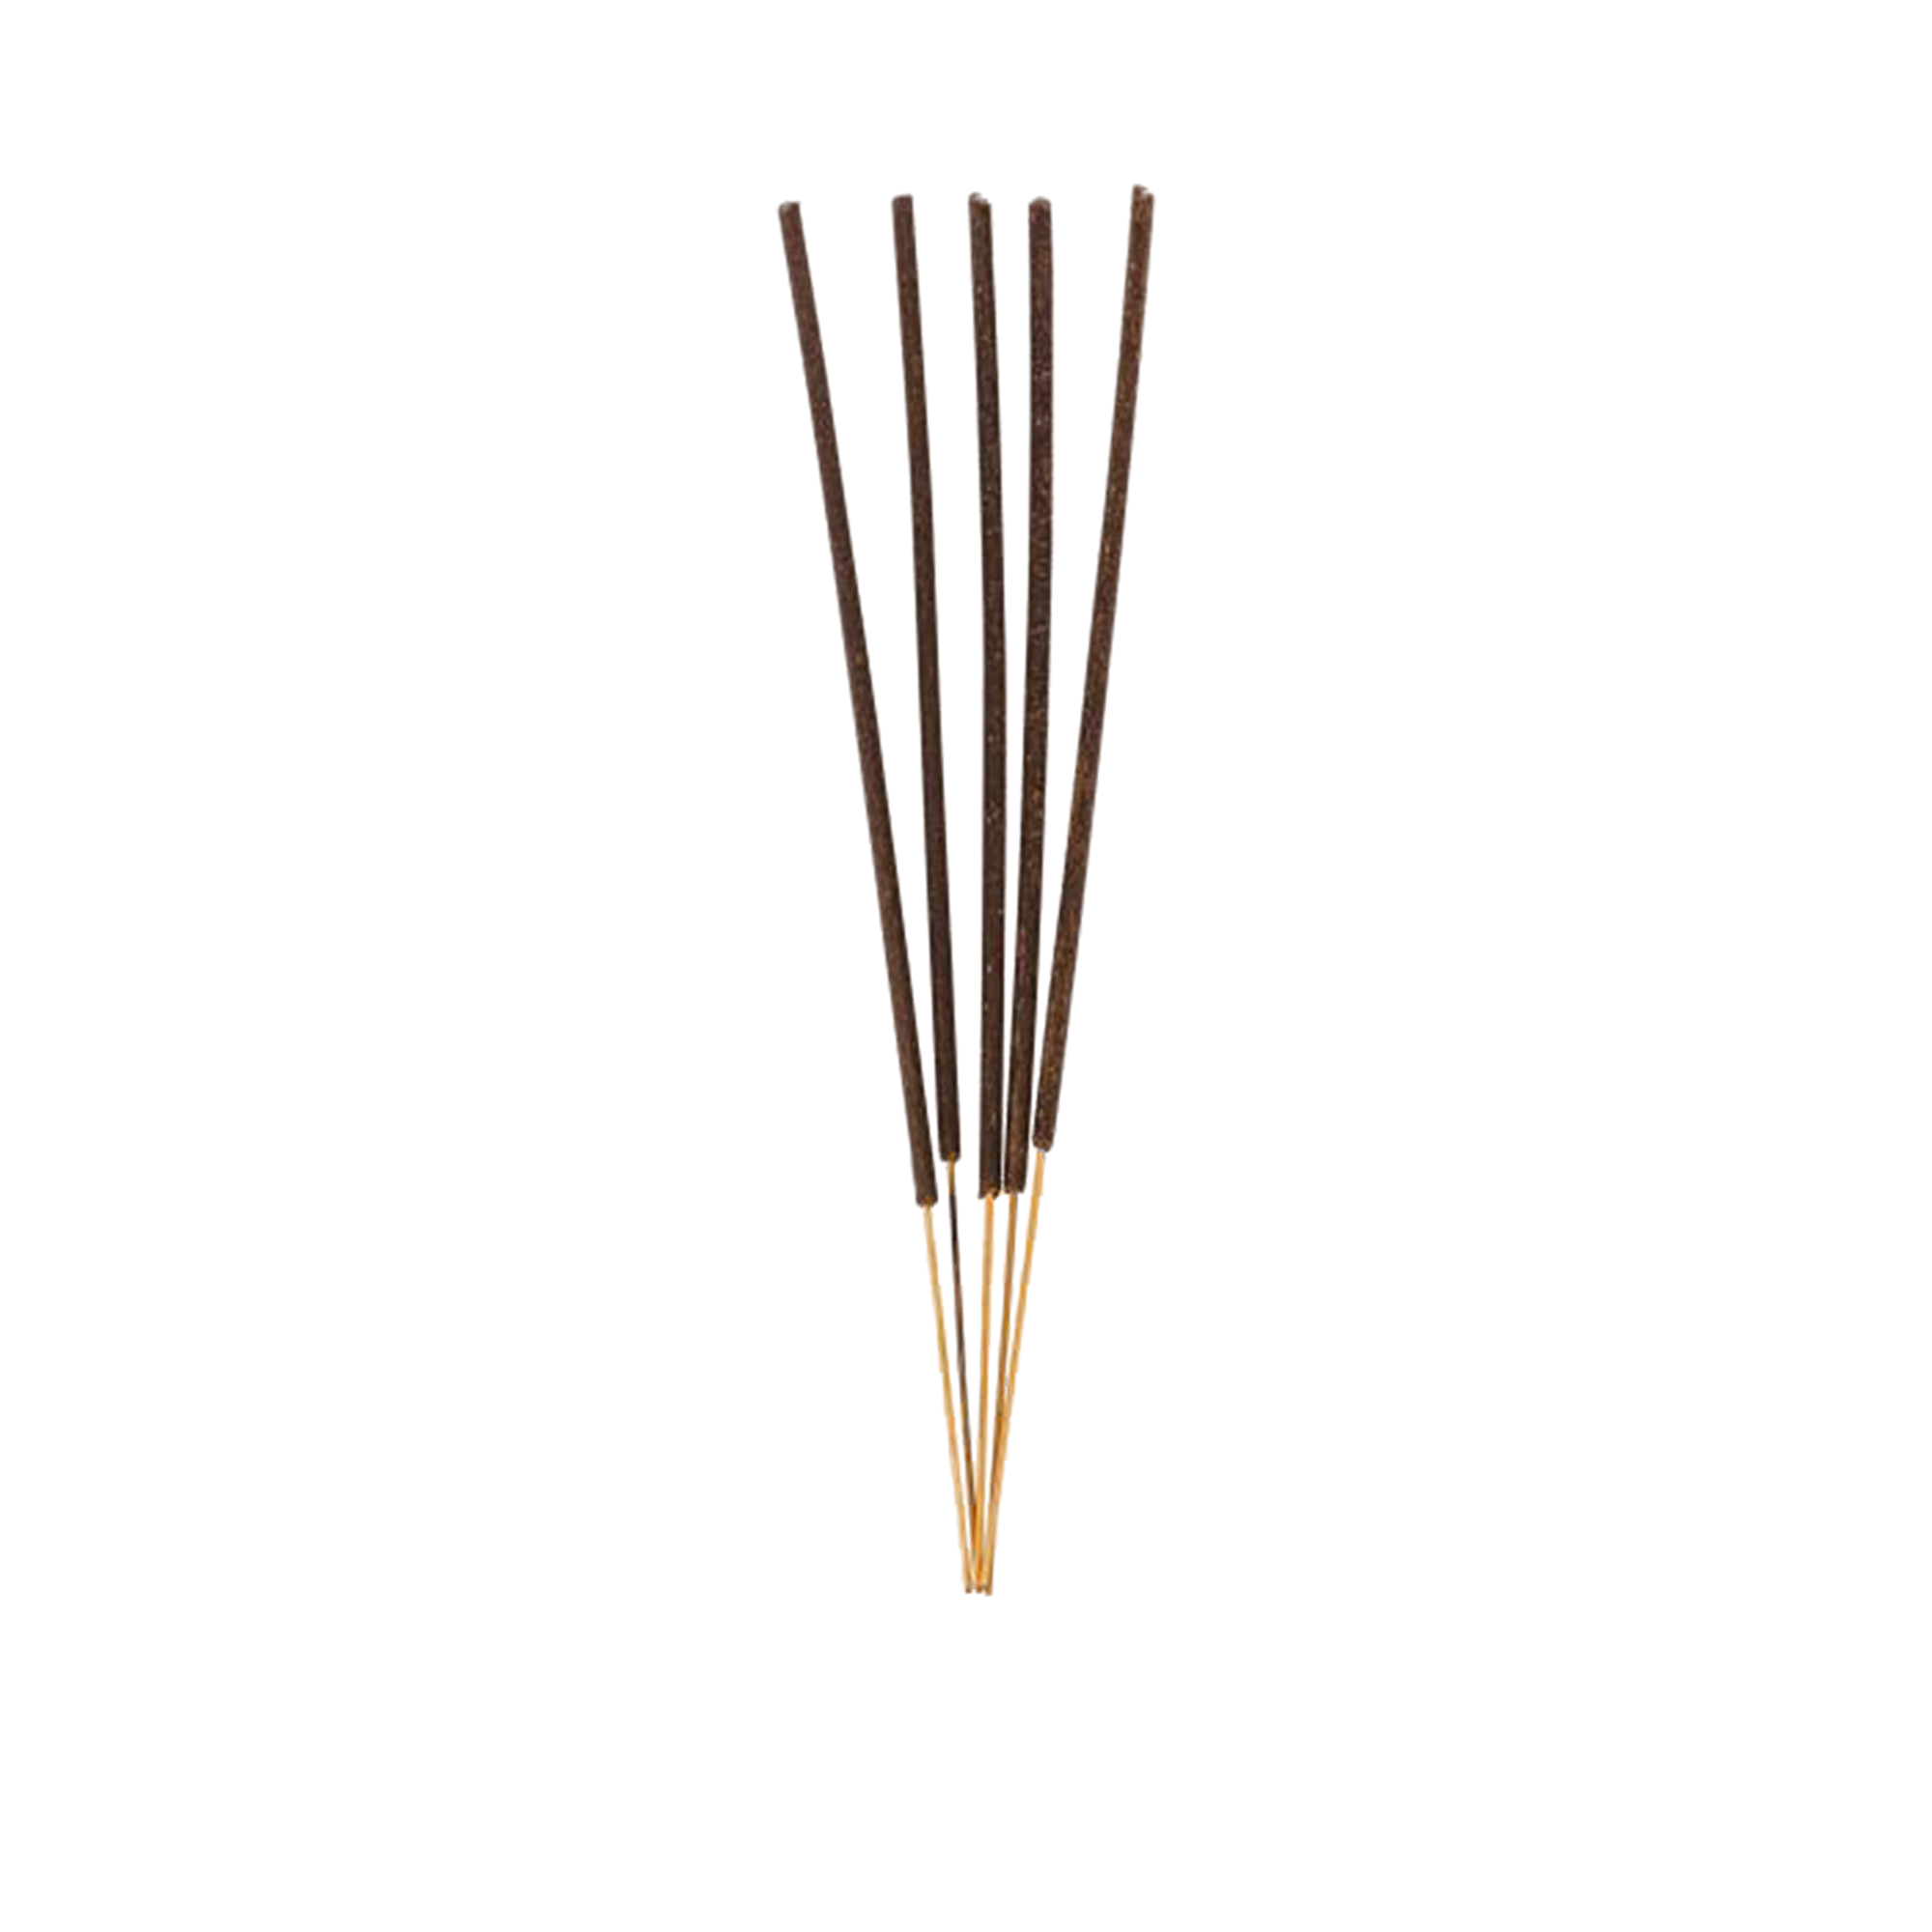 Black Orchid & Lily Incense Stick Set of 20